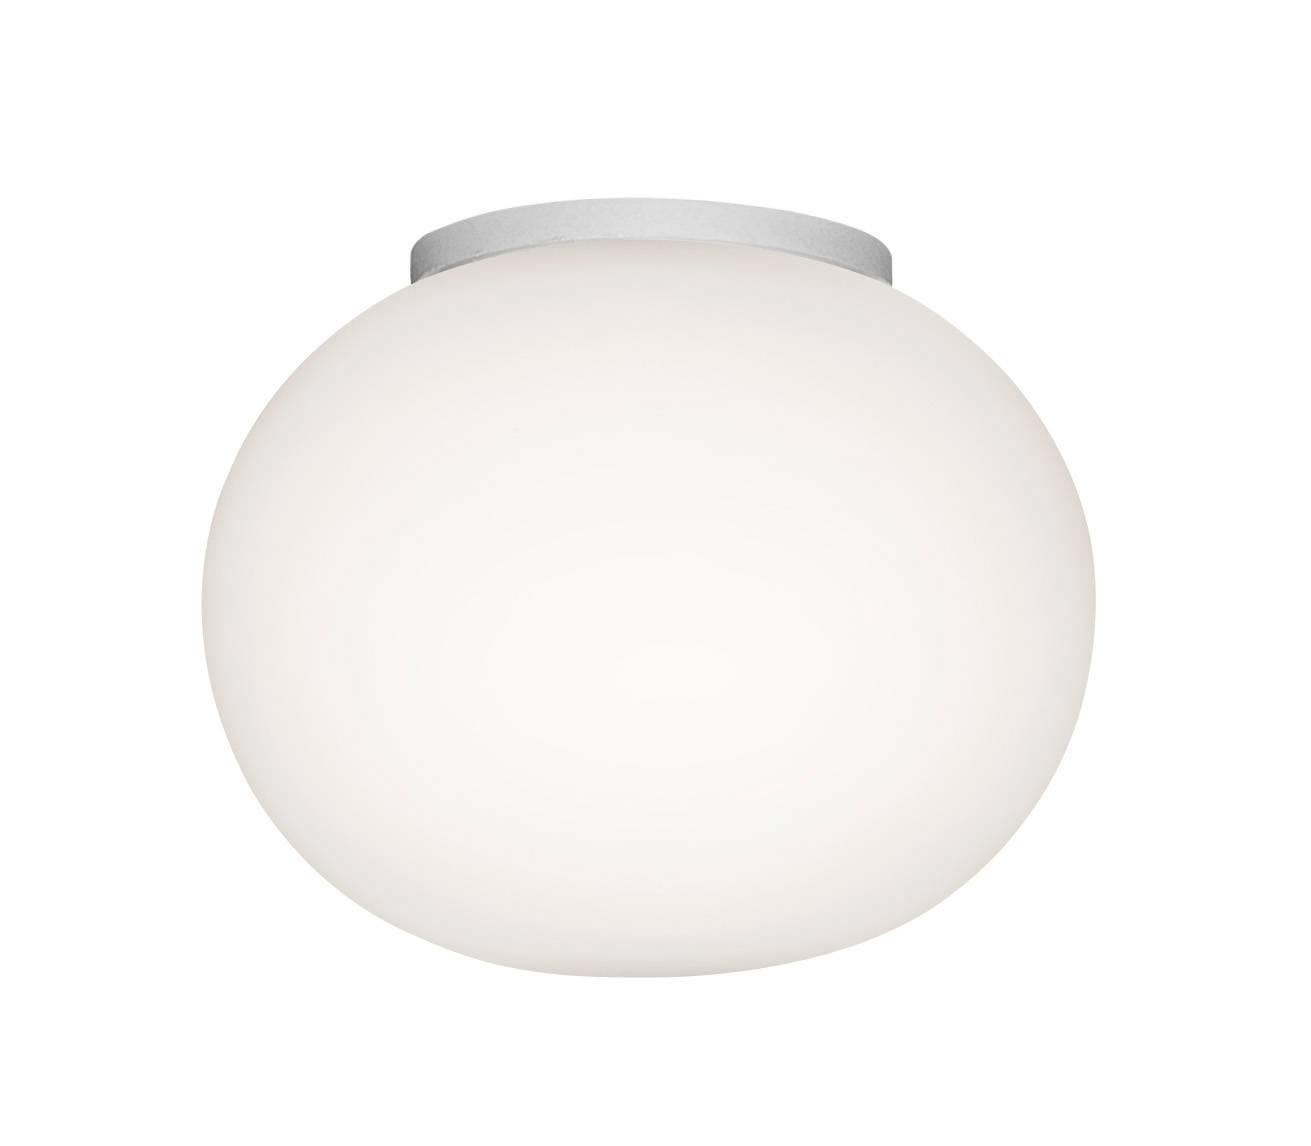 FLOS Glo-Ball Zero Ceiling & Wall Lamp by Jasper Morrison
Part of the popular Glo Ball Series, the Glo Ball Zero Ceiling & wall lamp was created in 1998 by artist Jasper Morrison to invoke the radiant calm of a full moon. This unique light has a